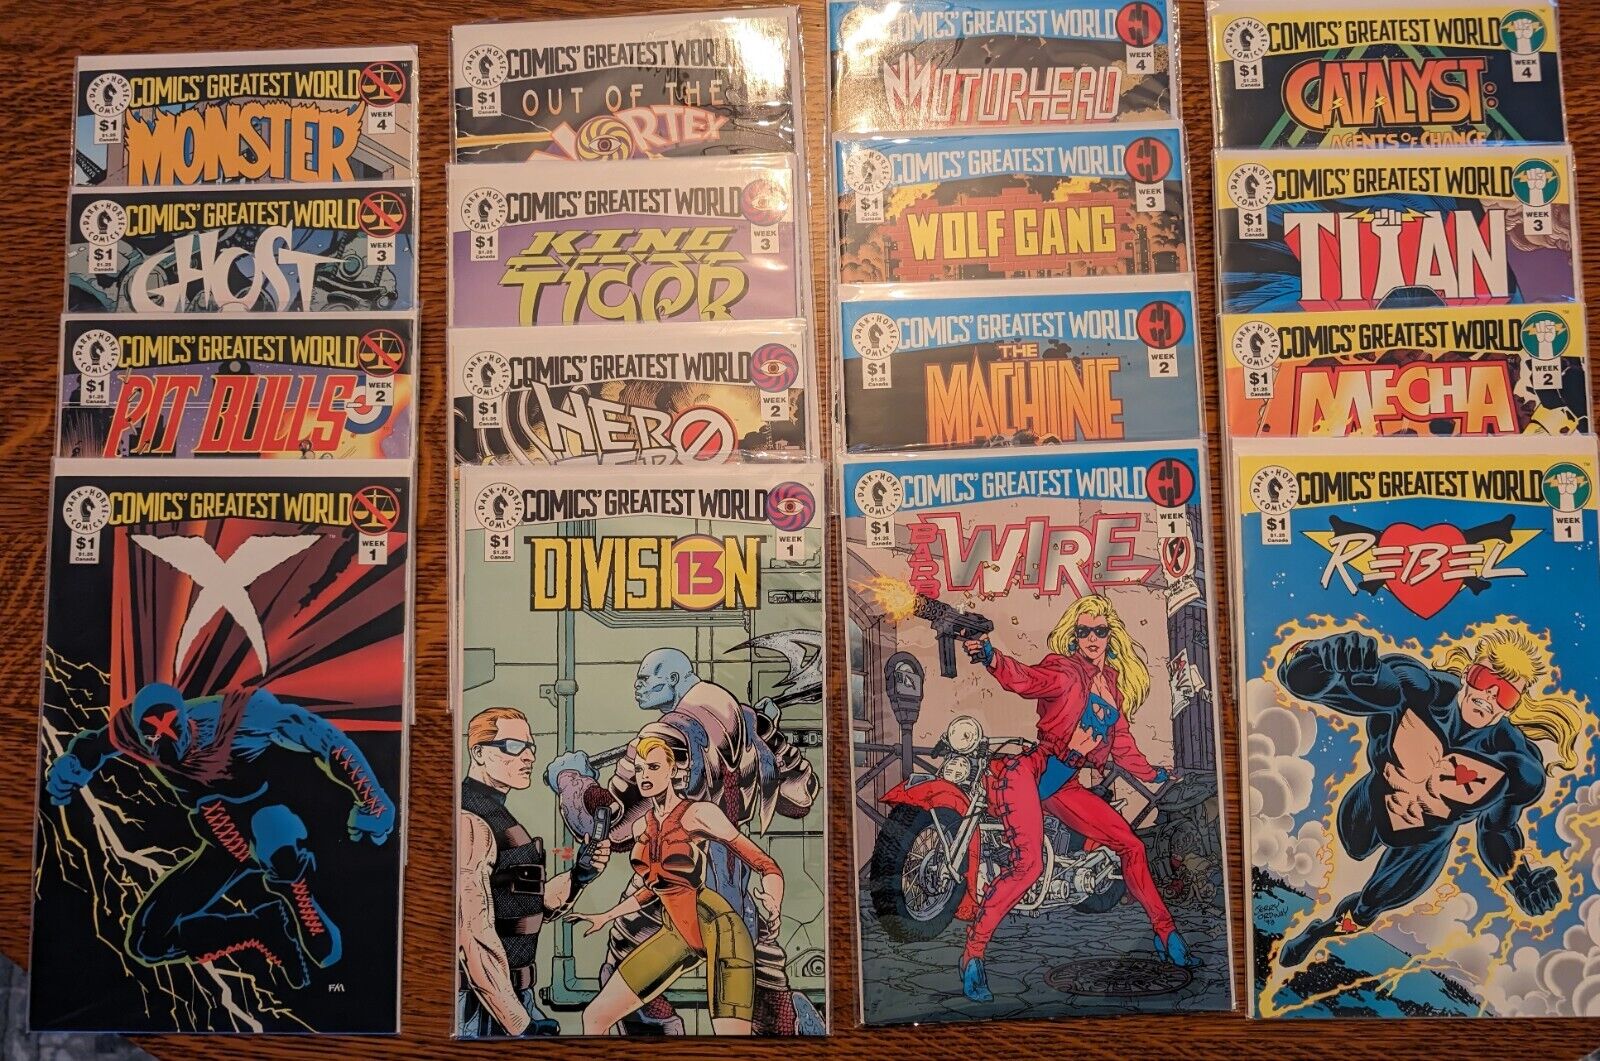 Comics Greatest World Complete Set (Four Series with 4 comics each)